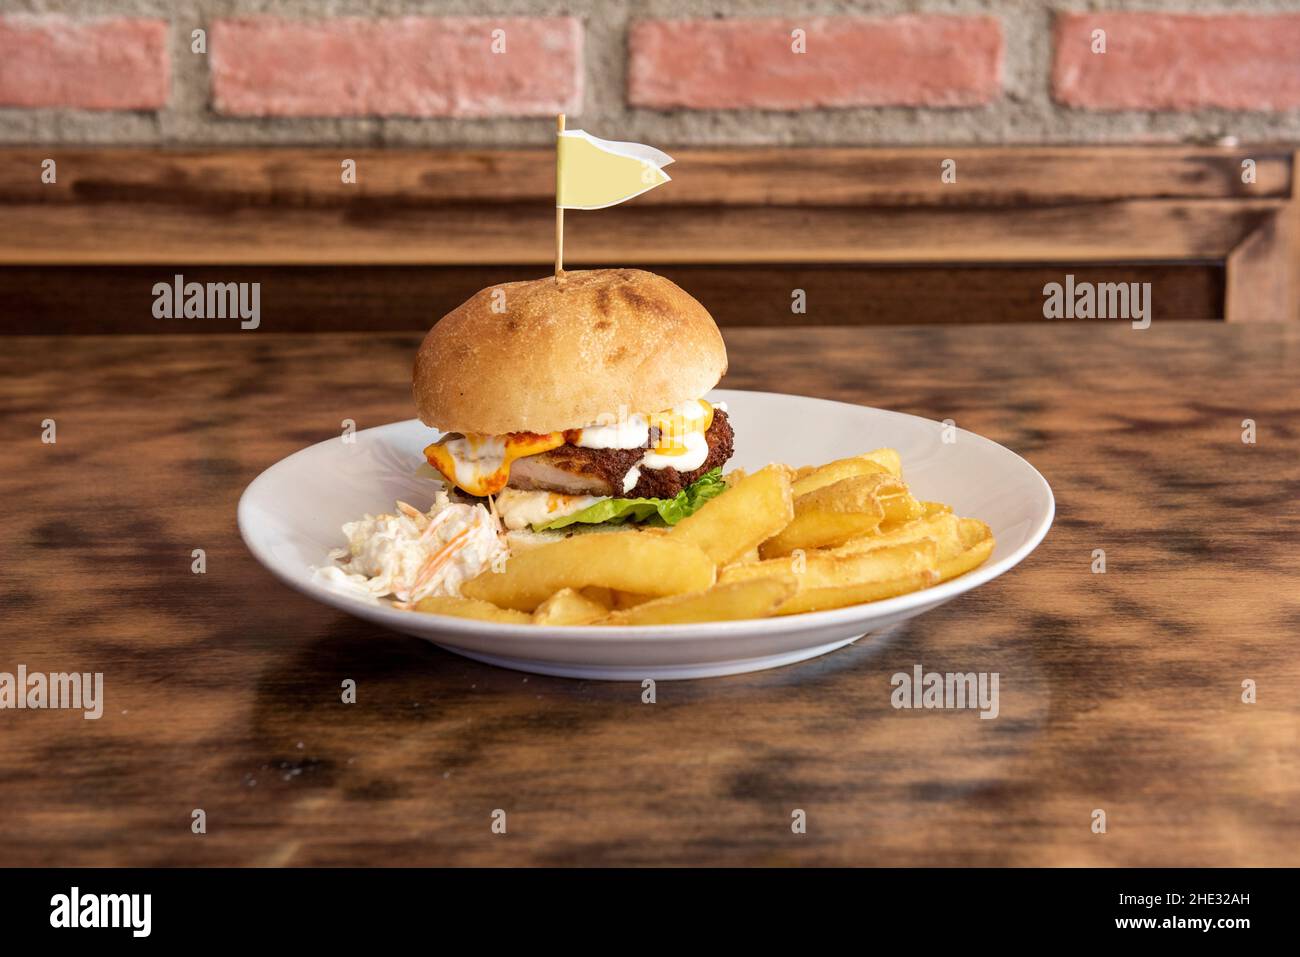 Fried chicken burger in batter with fried eggs and coleslaw with fries Stock Photo